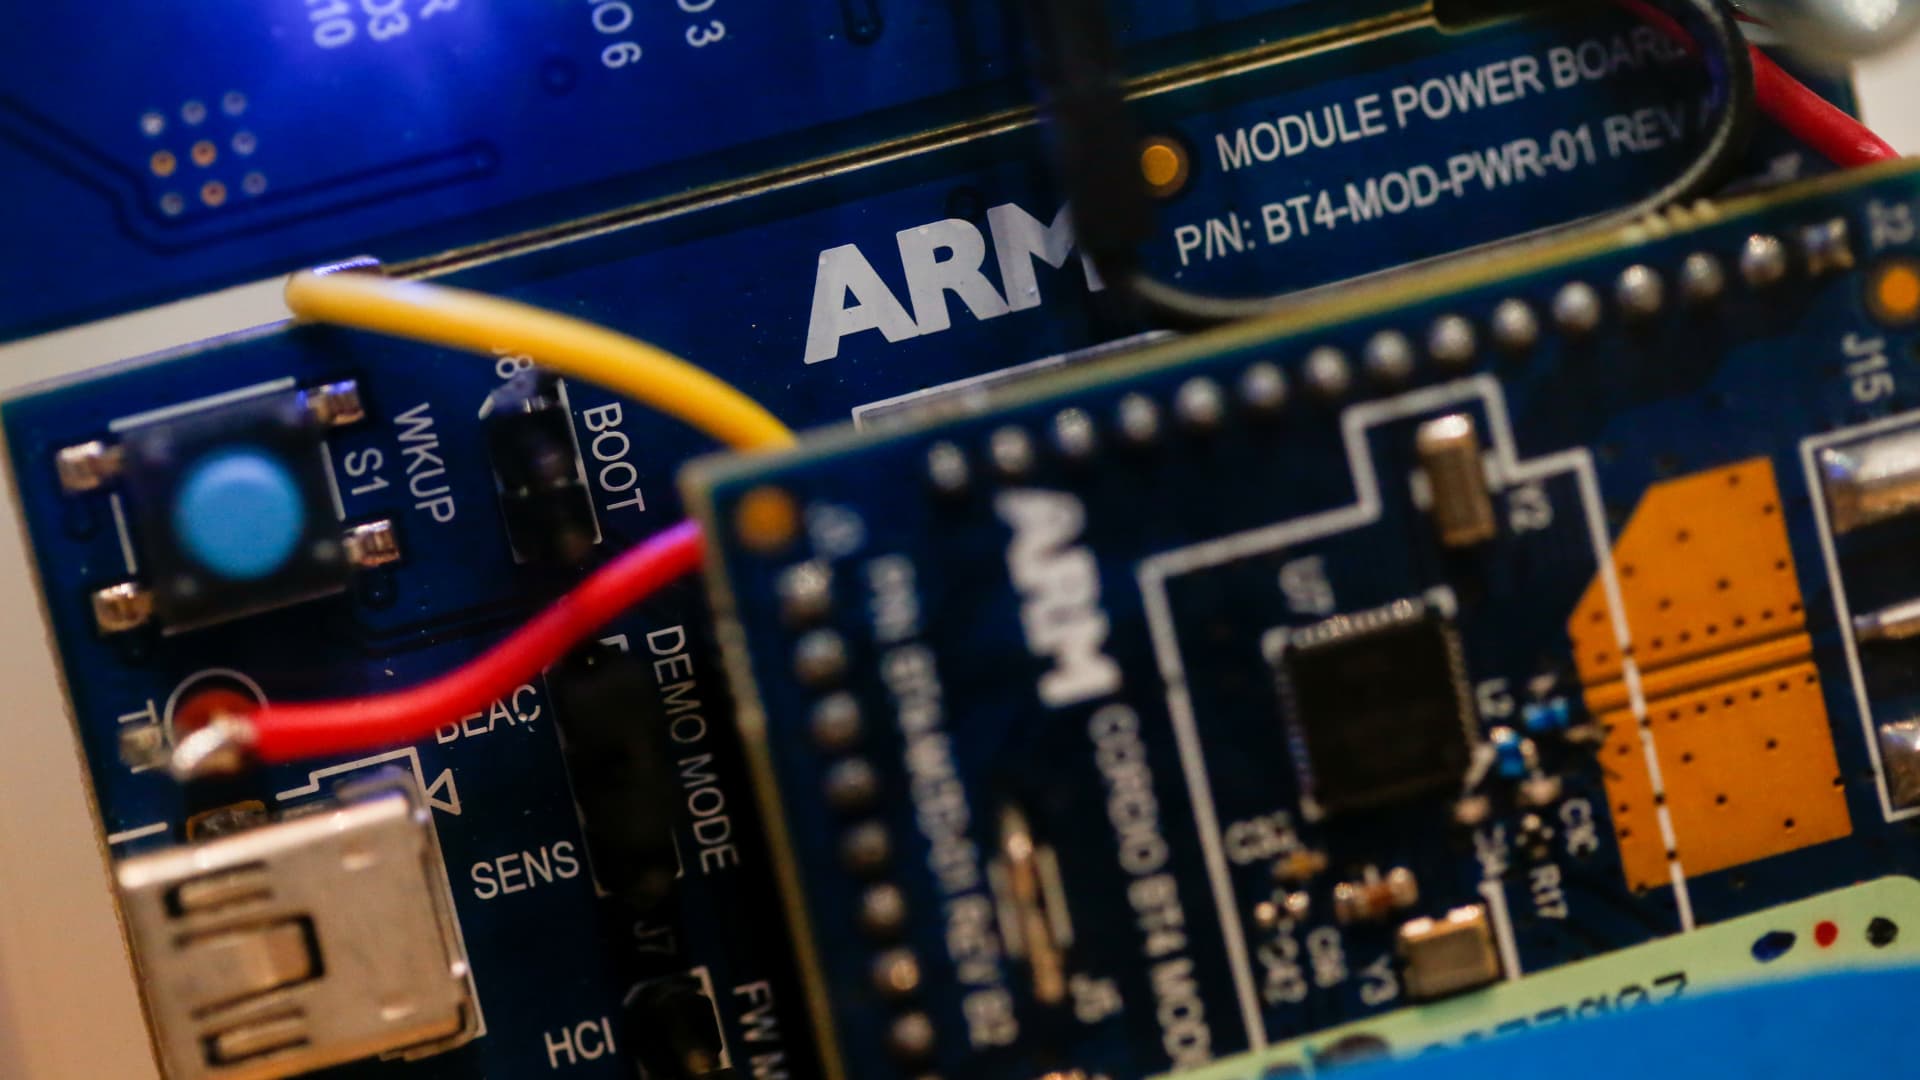 Chip design firm Arm seeks up to $52 billion valuation in US IPO